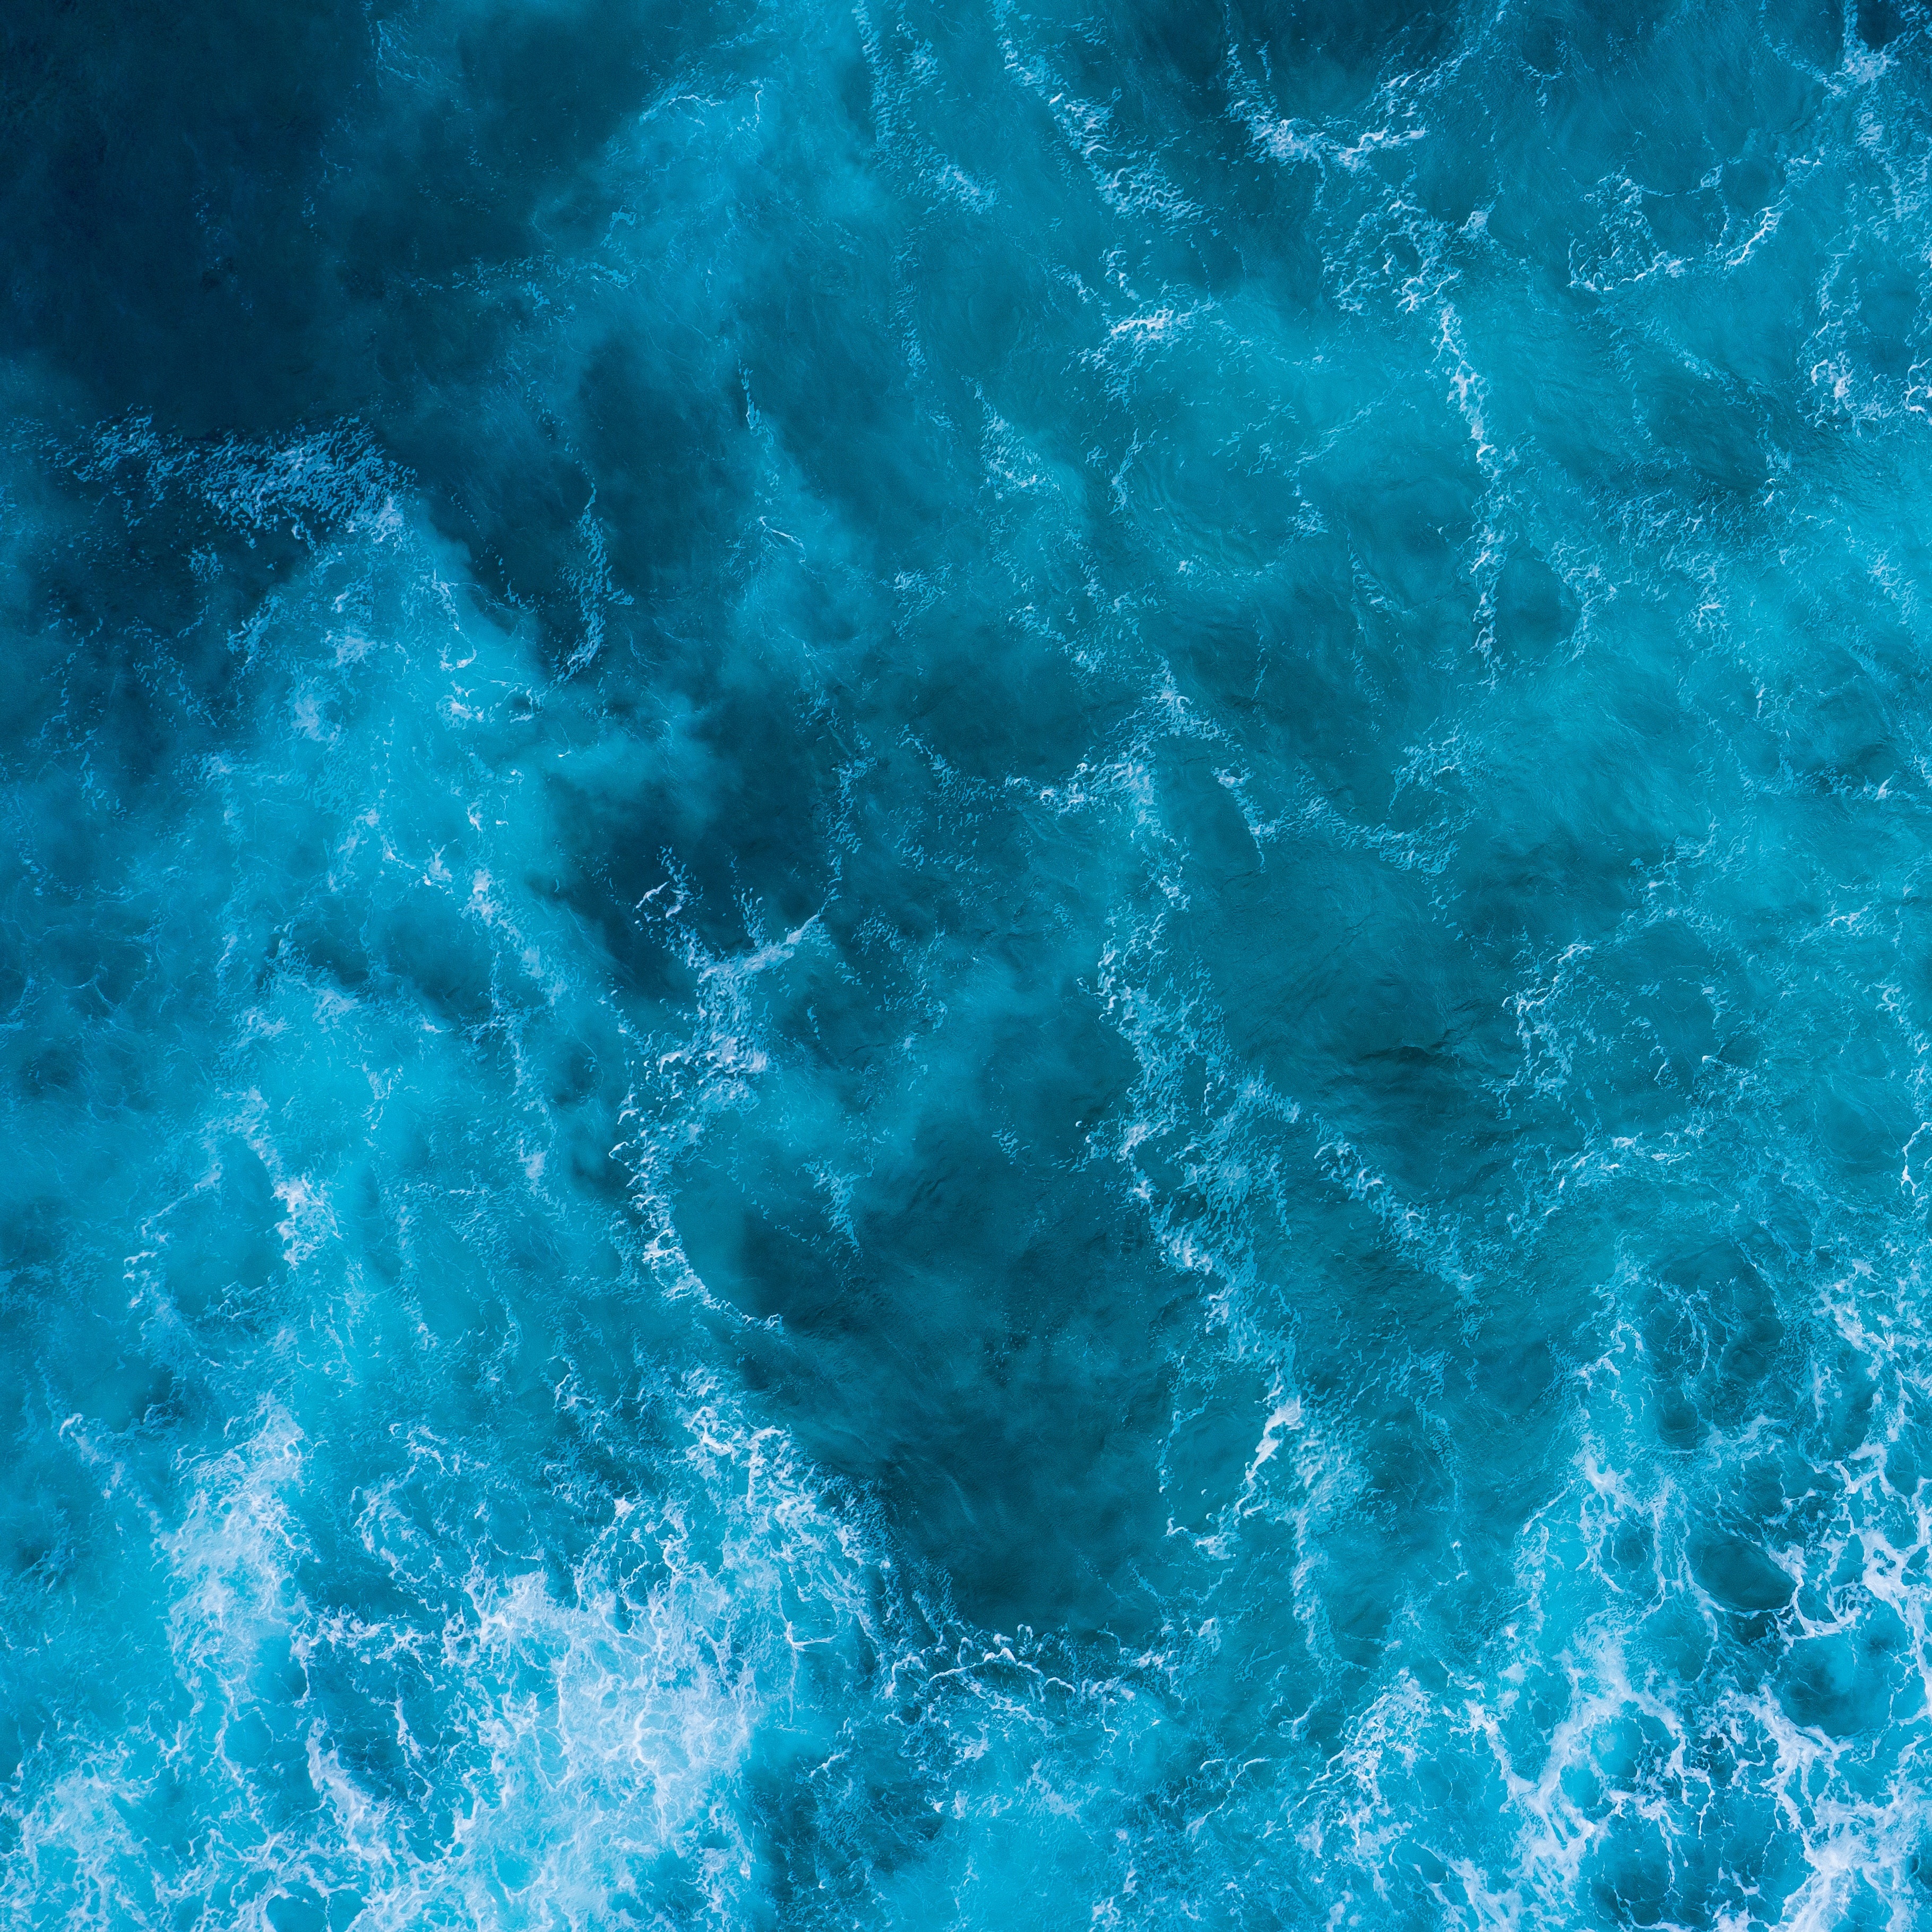 waves, water, blue, view from above, texture, textures, surface